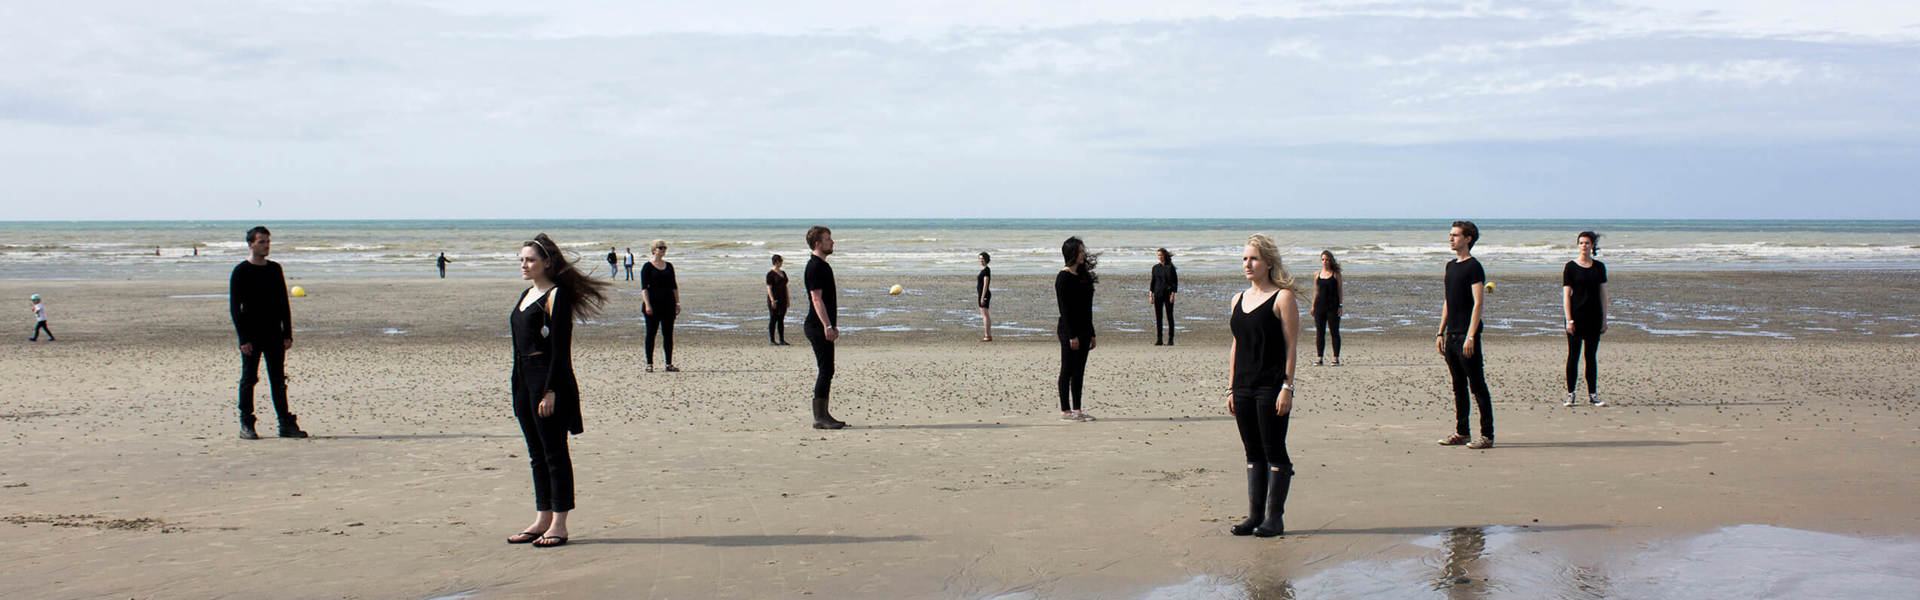 the London Contemporary Voices choir stood spaced out on a beach wearing black clothes